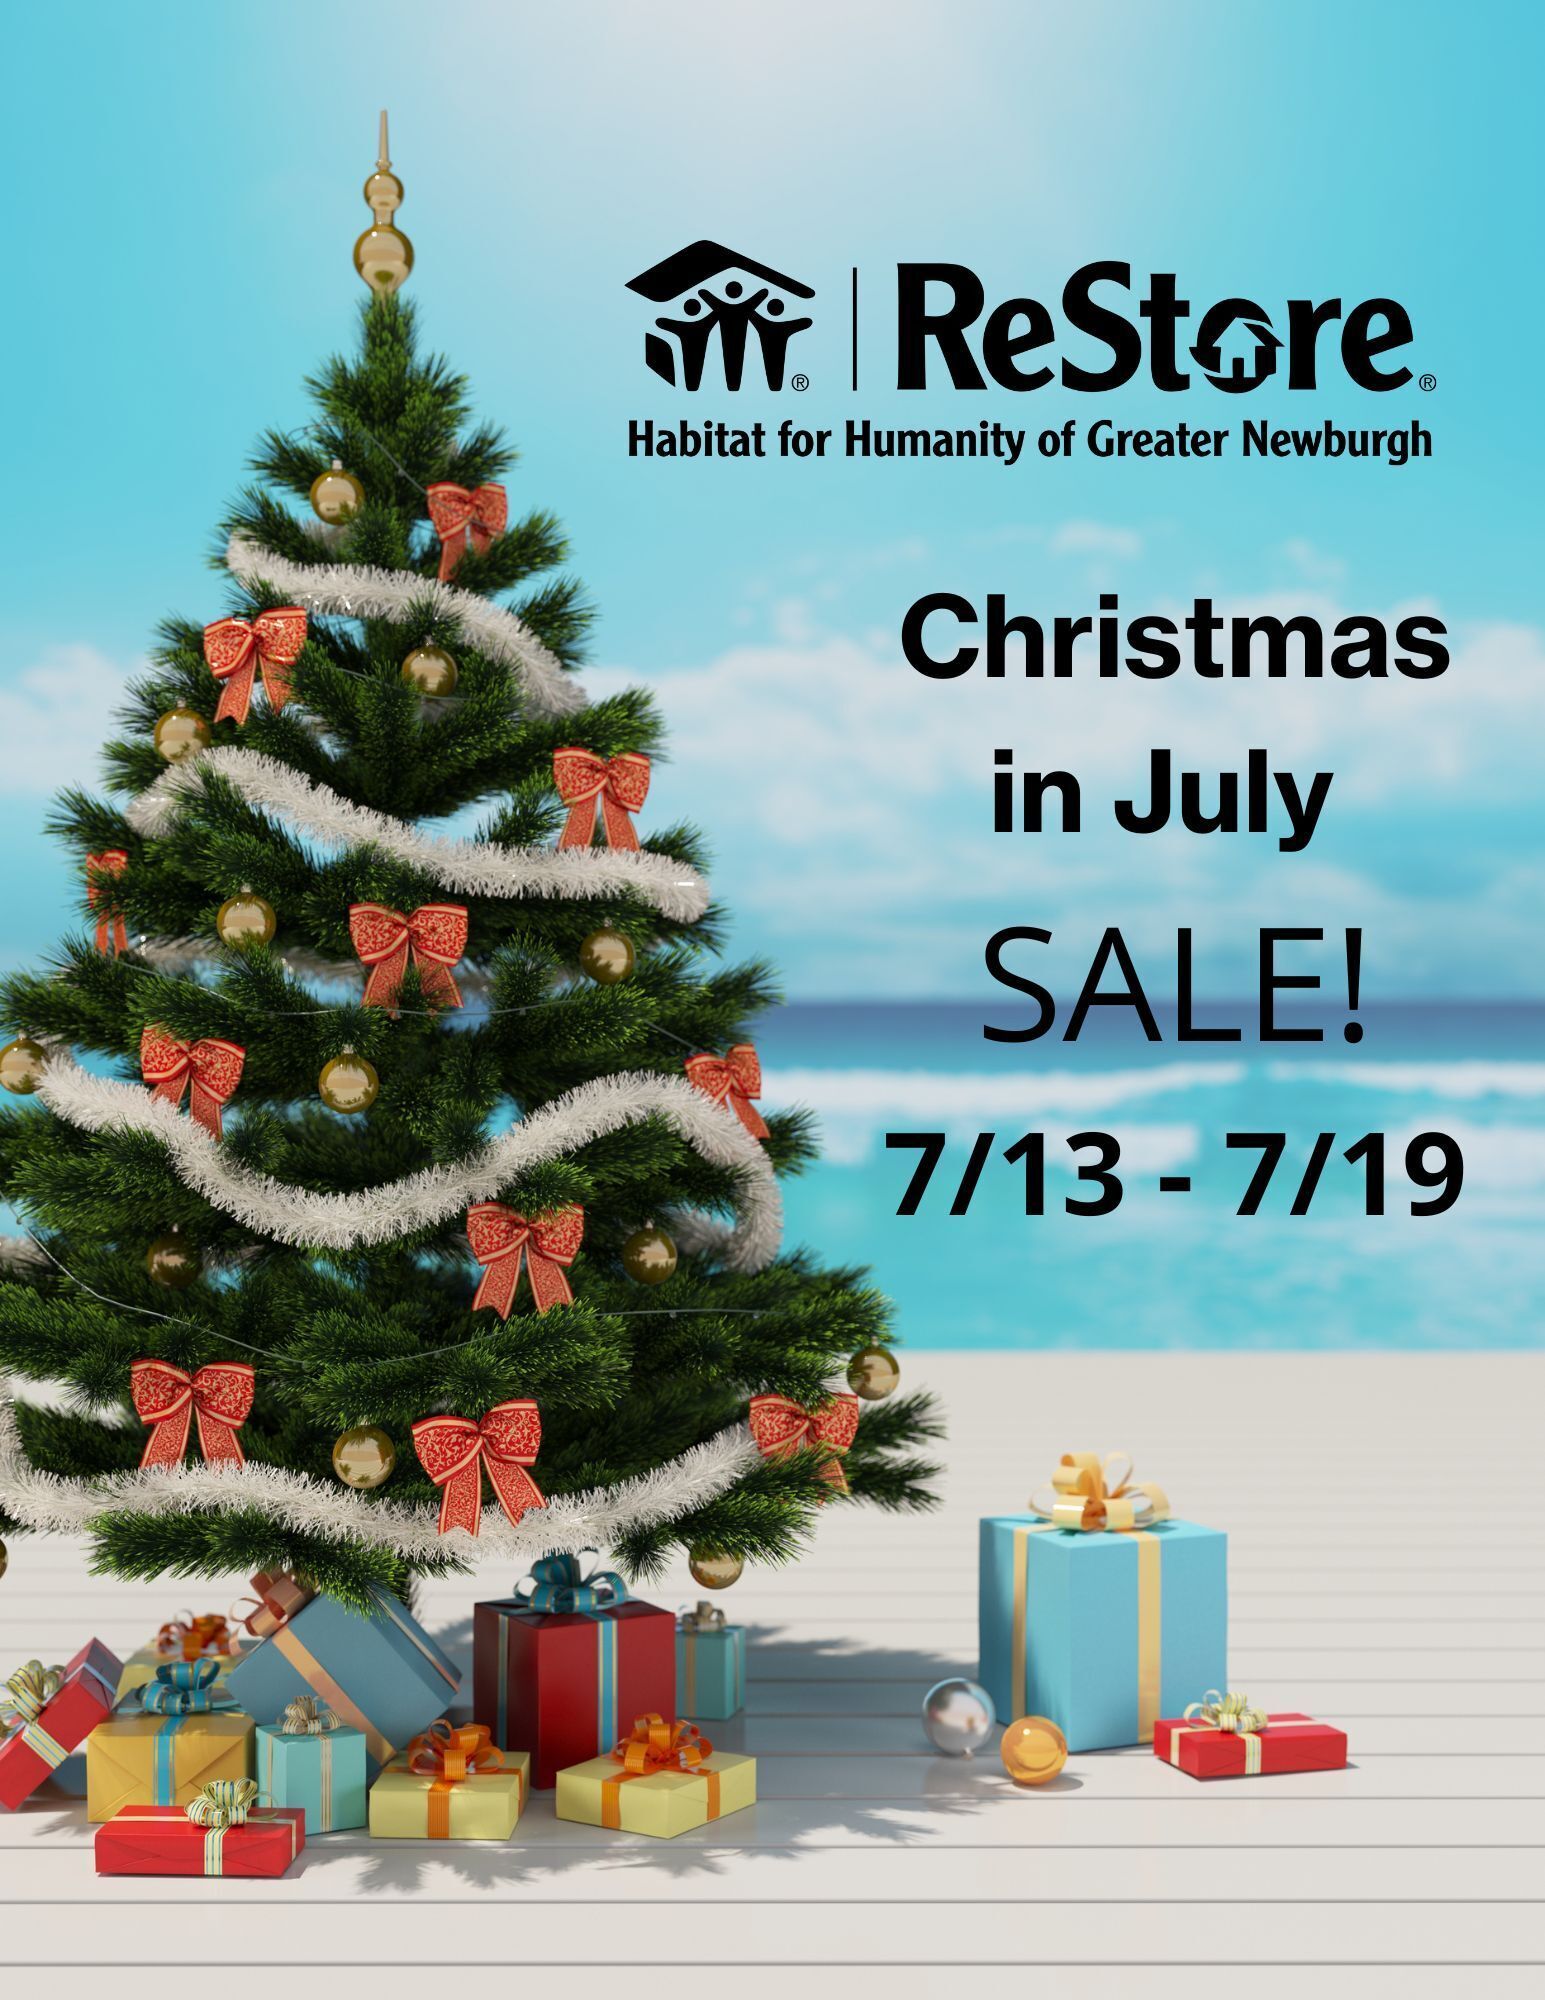 Christmas in July SALE at ReStore 7/13 - 7/19!